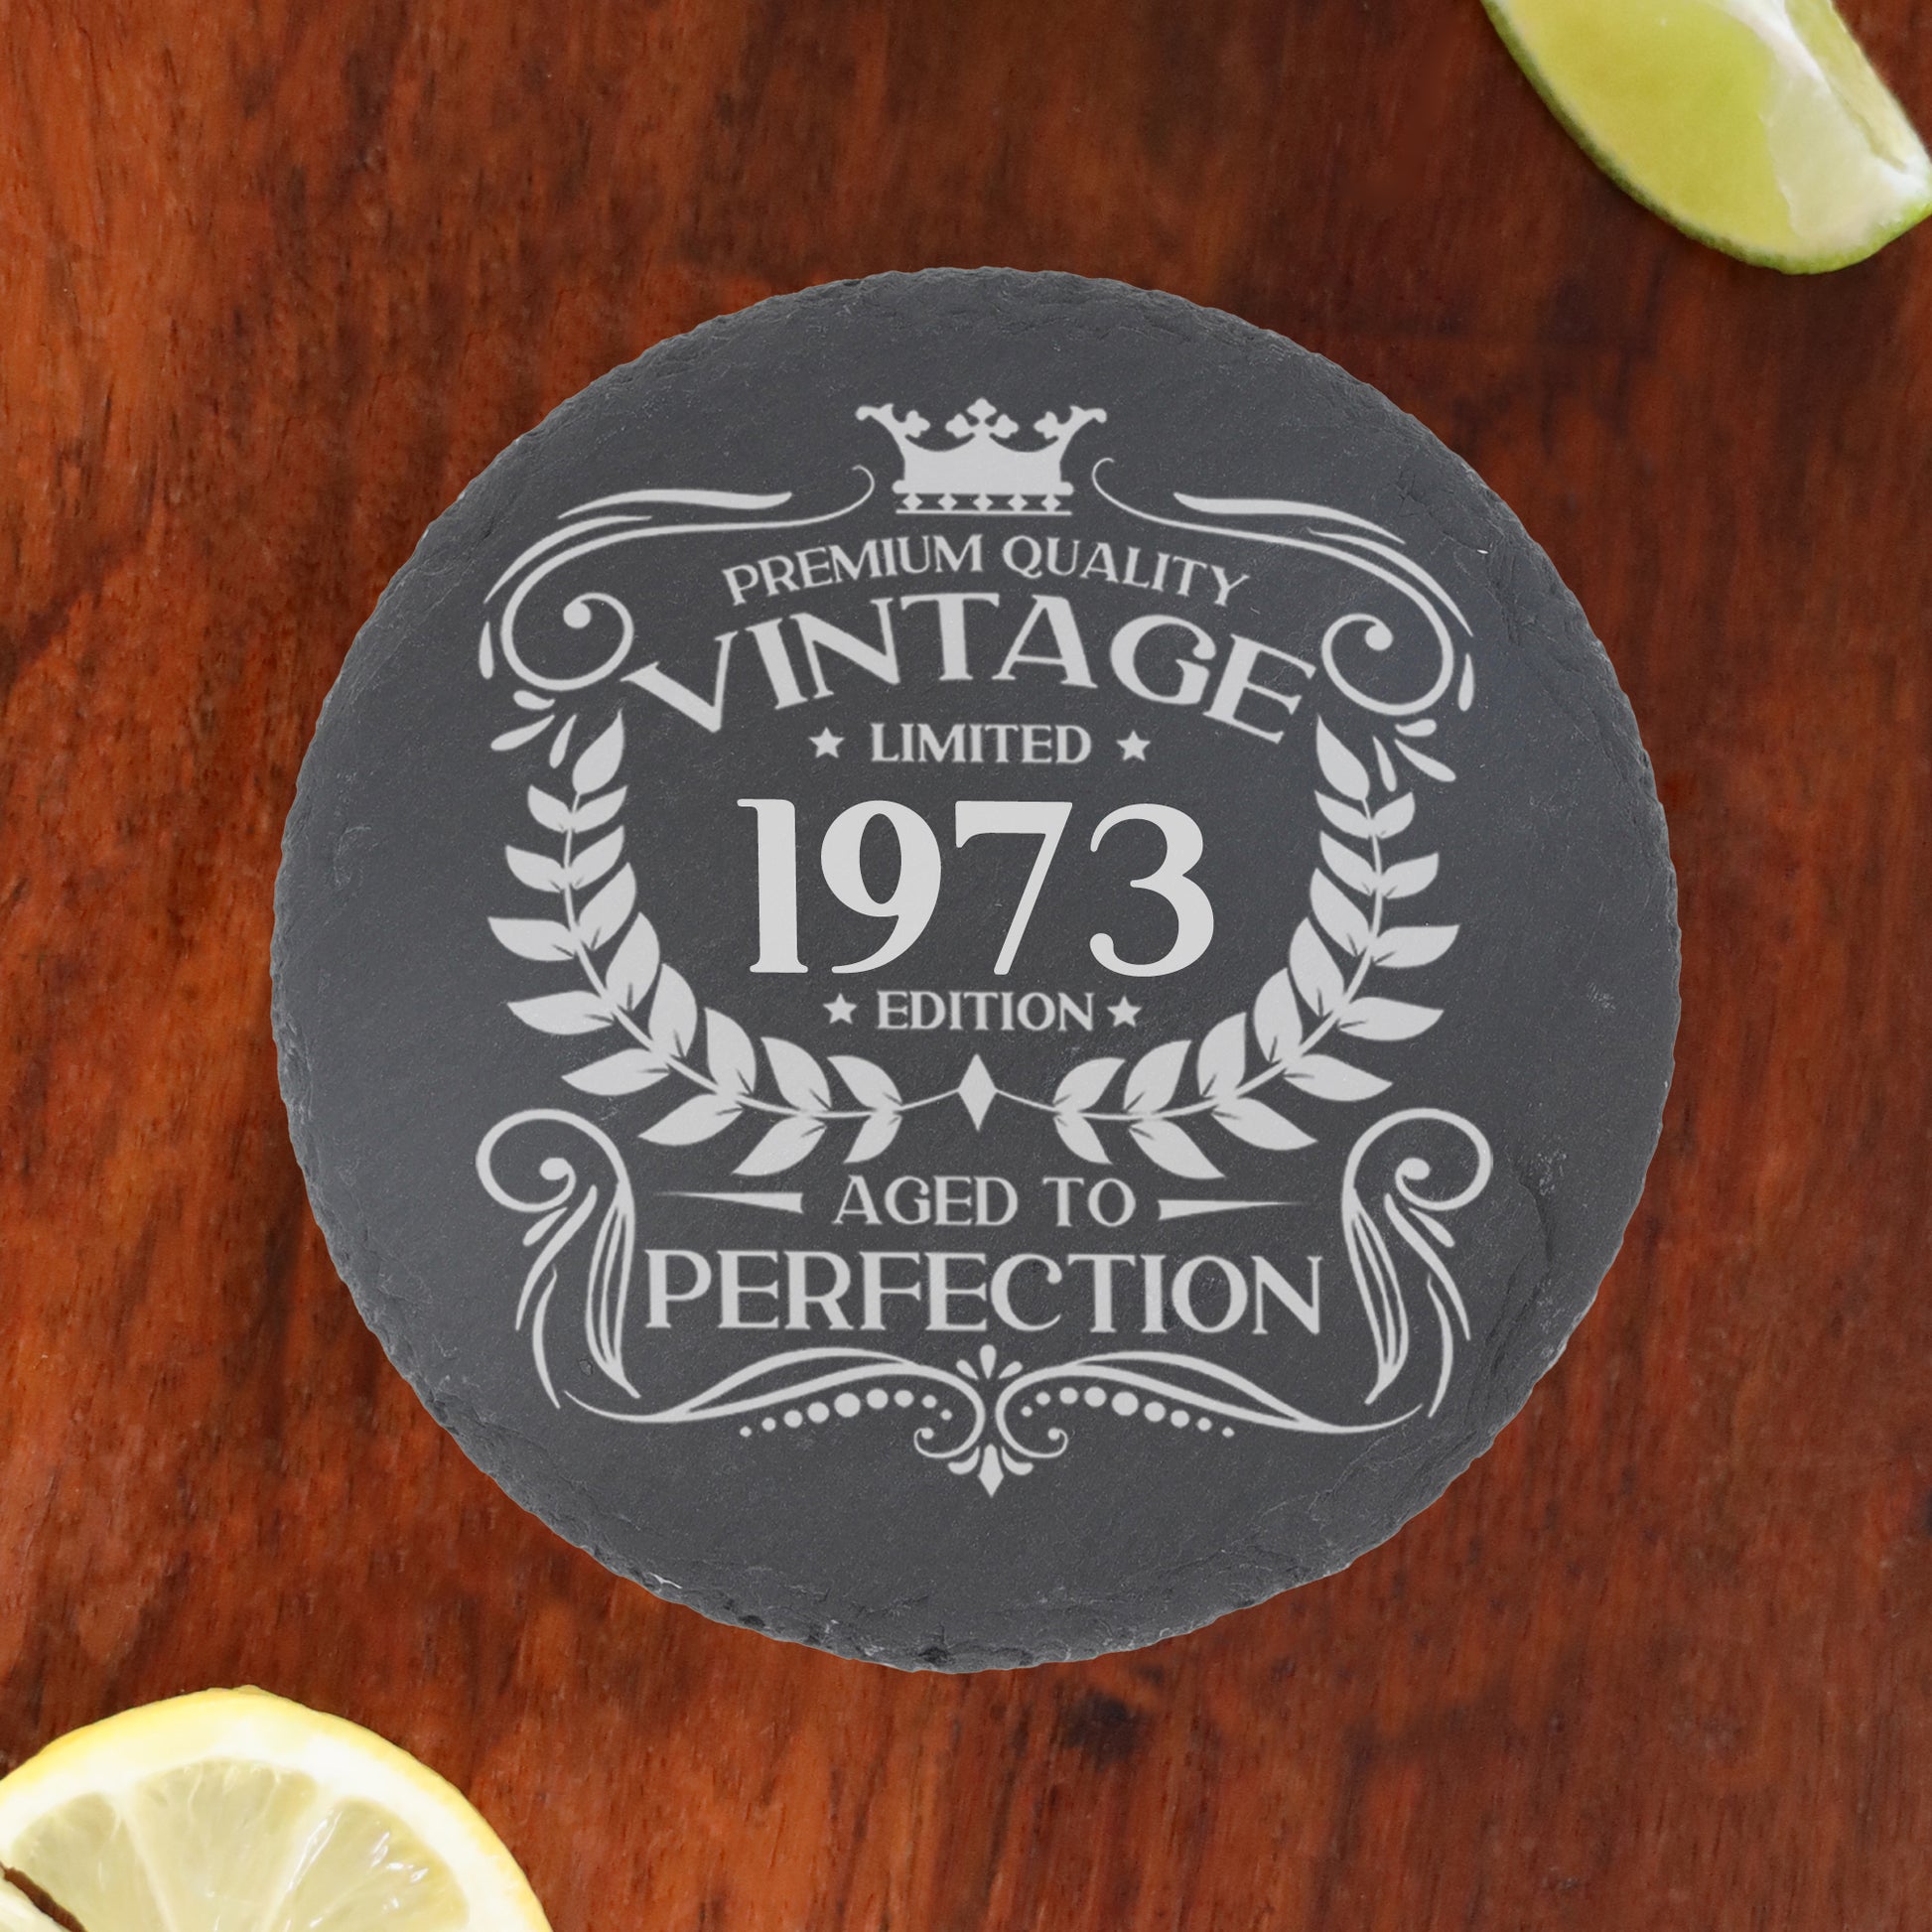 Personalised Vintage 1973 Mug and/or Coaster  - Always Looking Good - Round Coaster On Its Own  